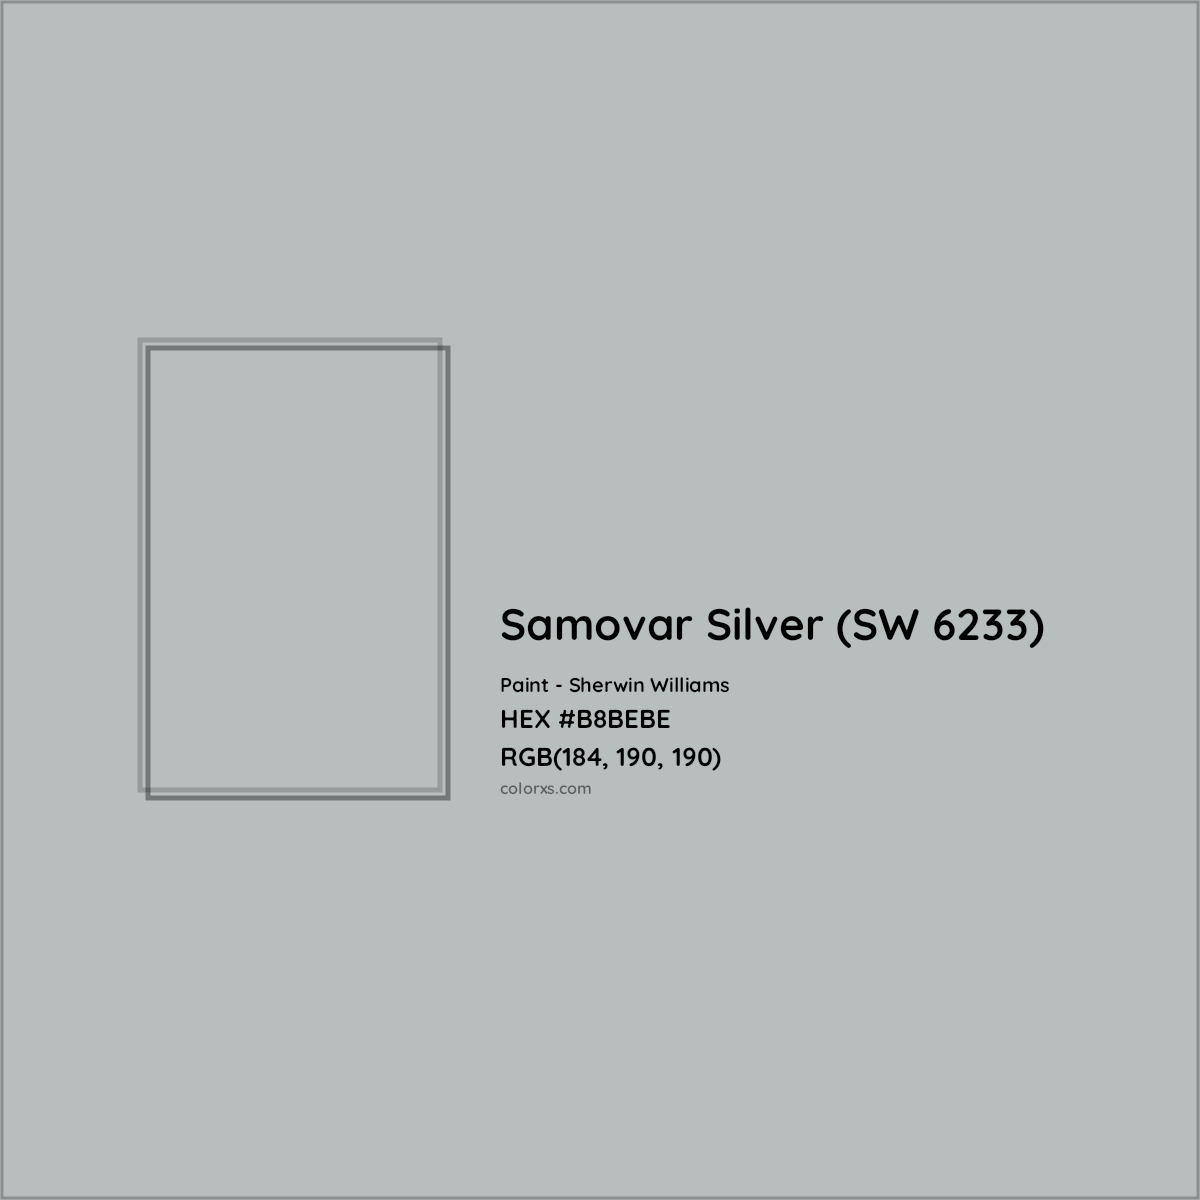 HEX #B8BEBE Samovar Silver (SW 6233) Paint Sherwin Williams - Color Code